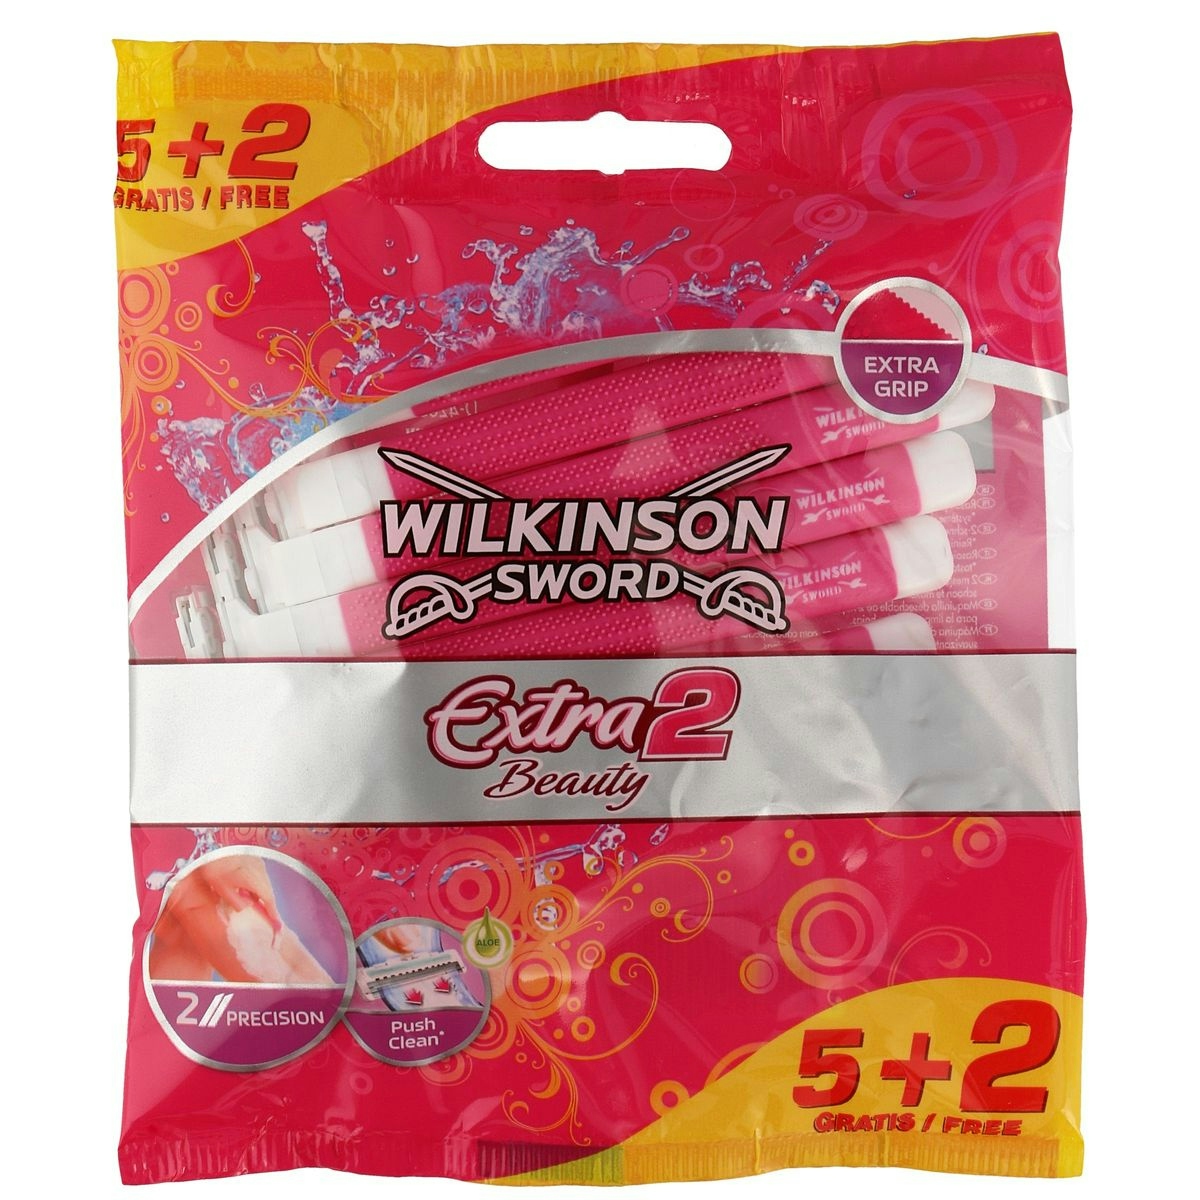 Maquinilla desechable extra II lady beauty WILKINSON 5+2 ud.